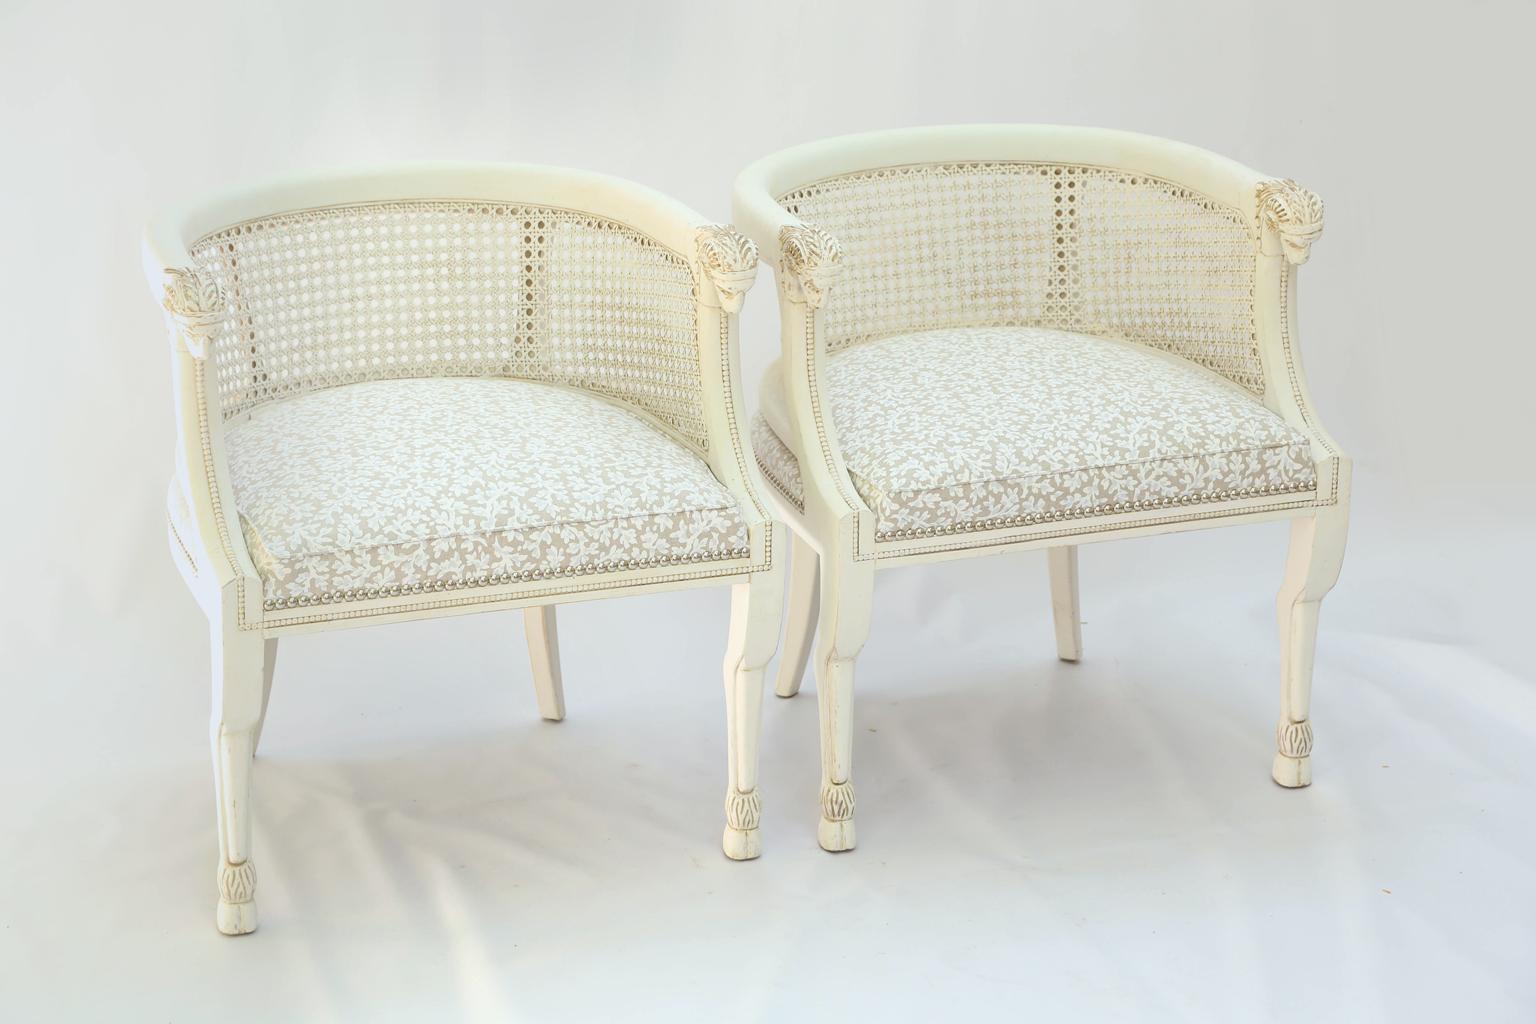 Pair of barrel-form, painted bergère chairs, each having a rounded, molded crestrail, extending into carved ram's masks, over hand-caned backs and sides, crown seat upholstered in vintage floral-printed linen with silver nailheads, raised on front